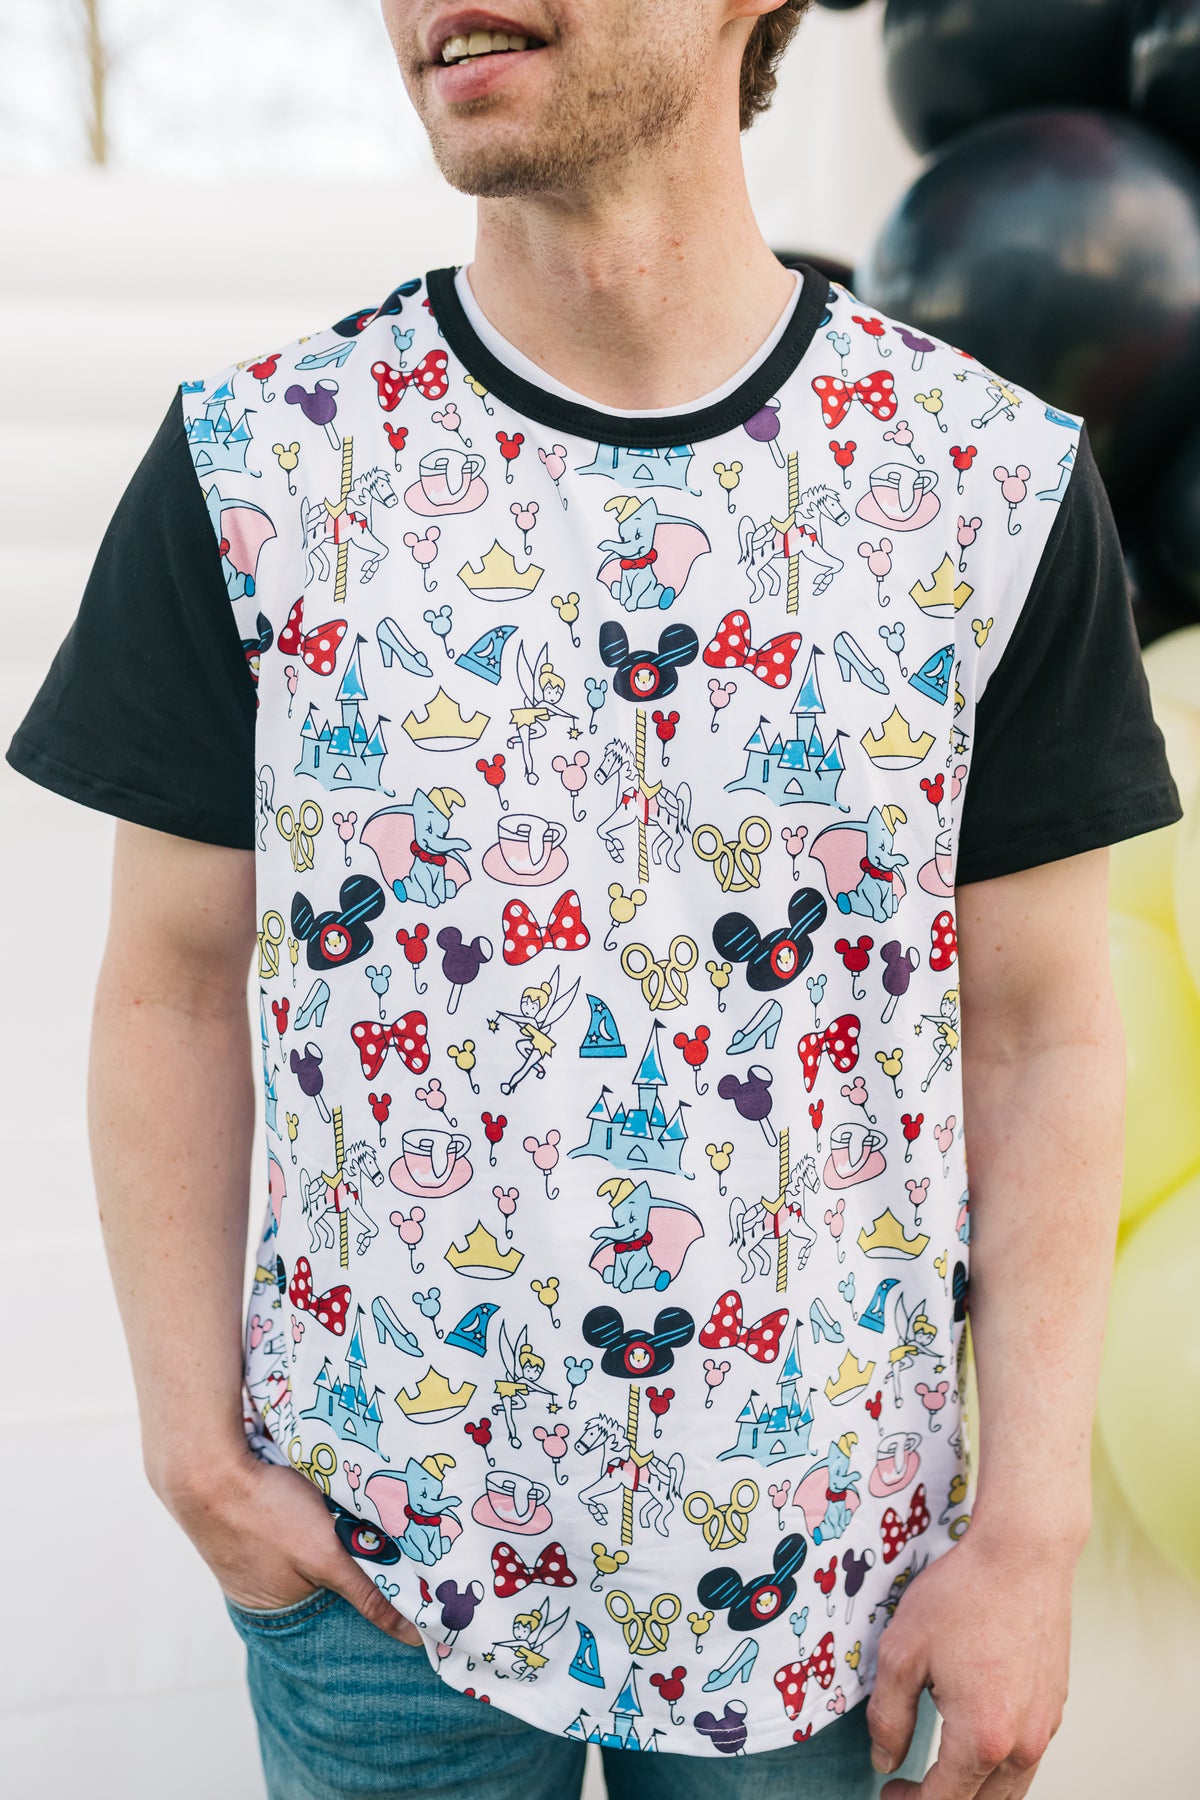 The Parks Tee | Adult | Happiest Place Collection